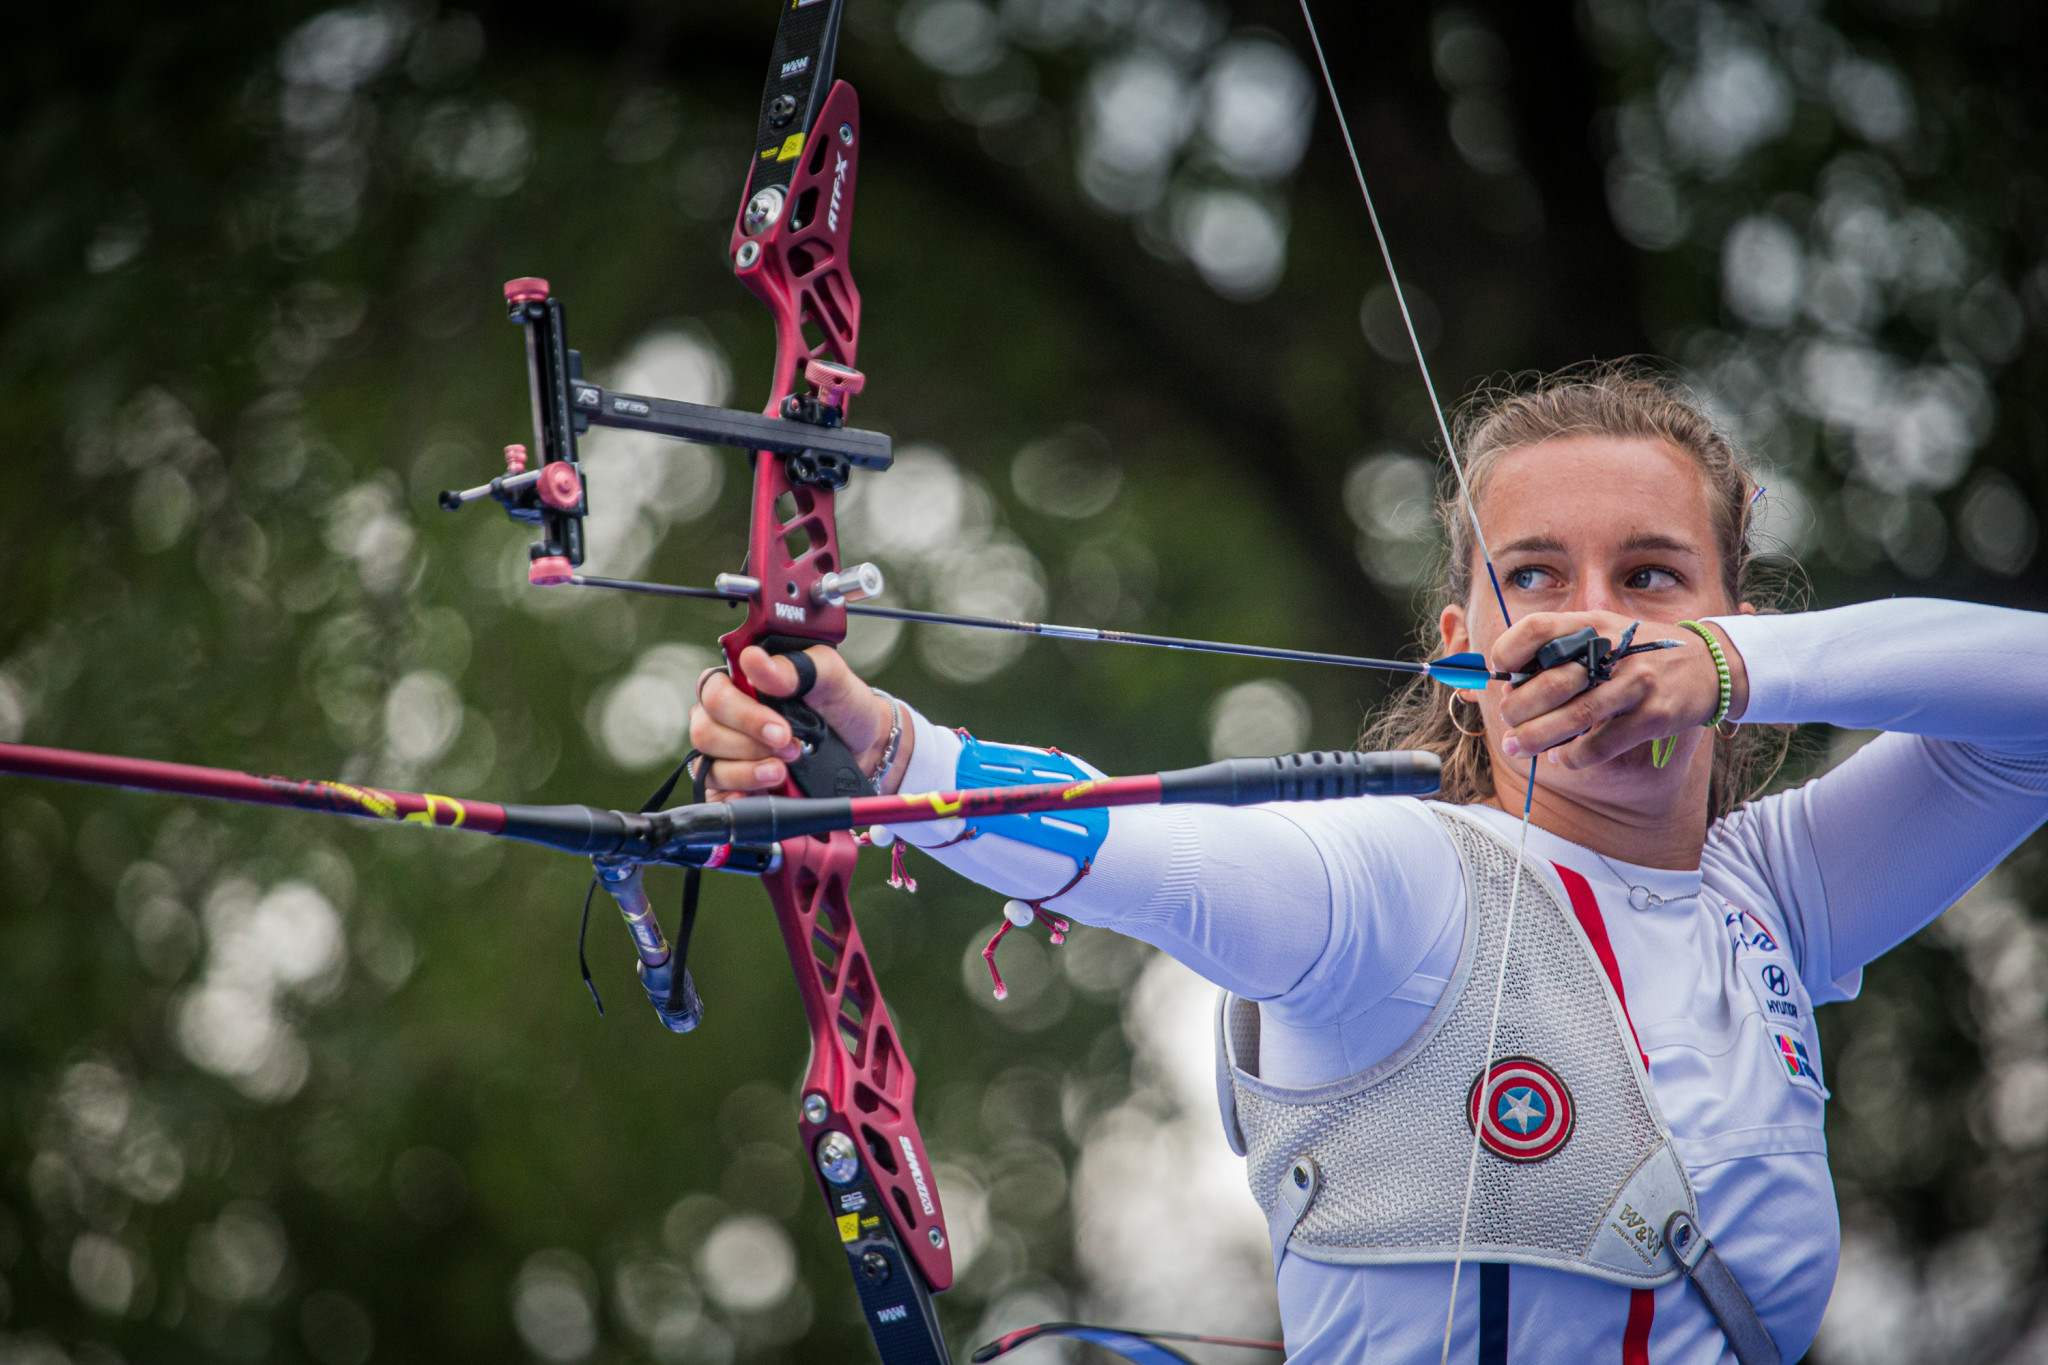 Lisa Barbelin beat Vanessa Landi to win the women's recurve gold medal ©Getty Images